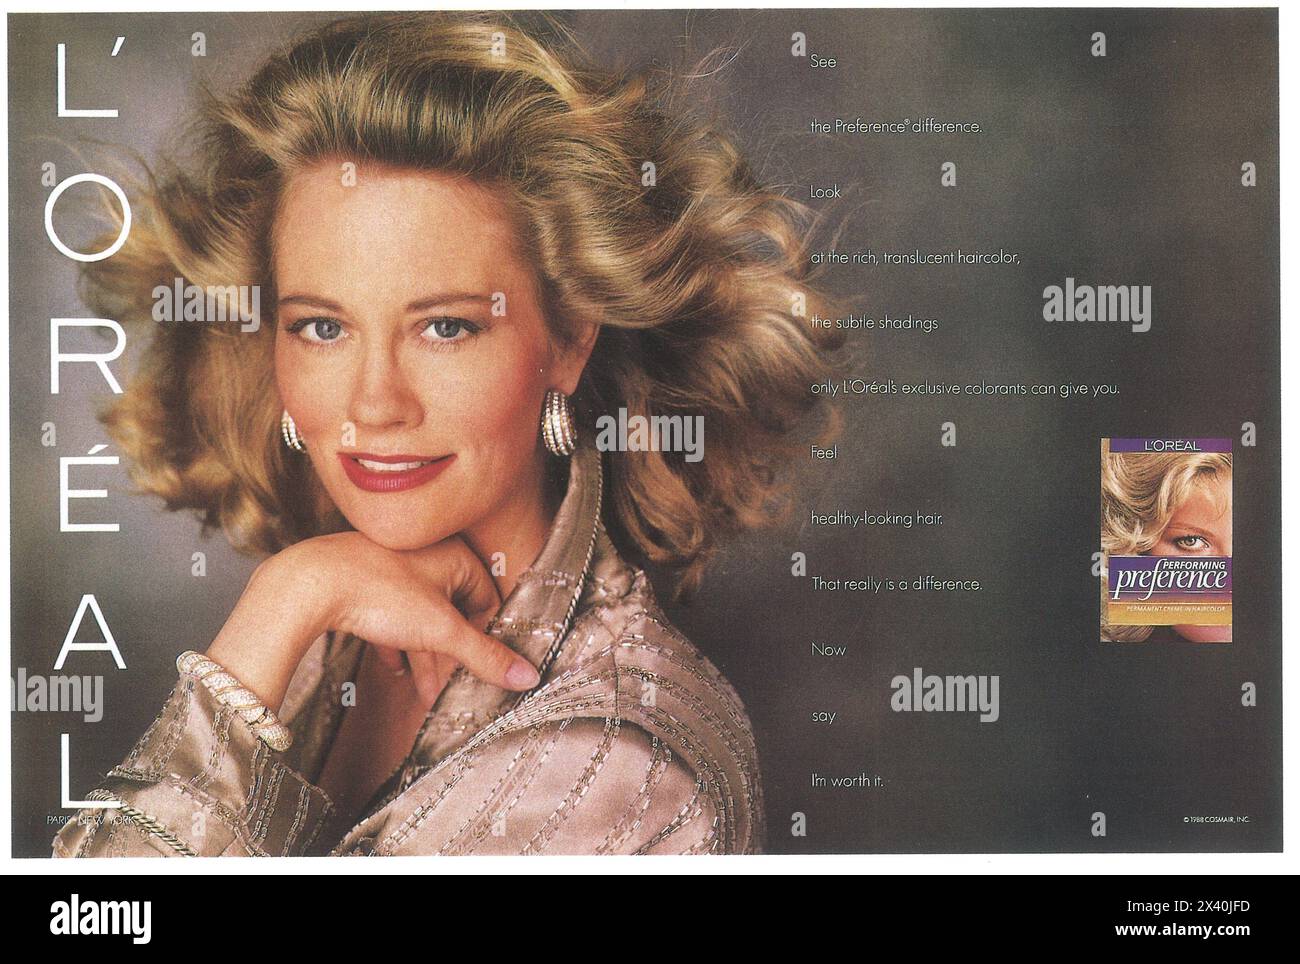 1988 l'Oreal Performing Preference Haircolor ad with Cybill Shepherd Foto Stock